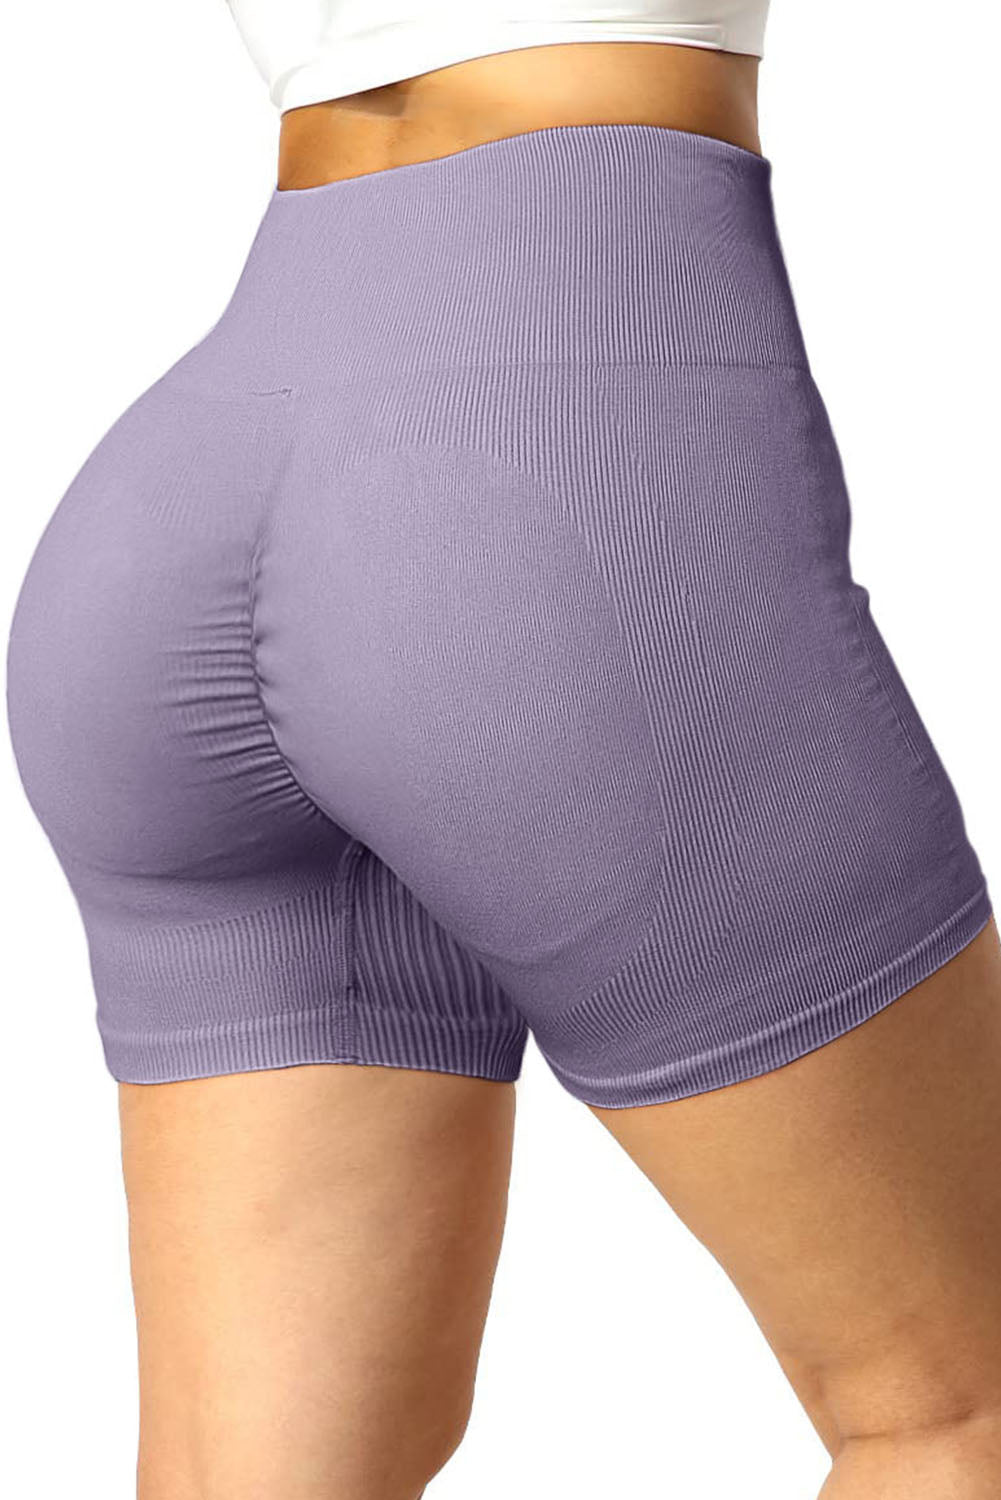 Ribbed Sports Shorts - Purple / S - Women’s Clothing & Accessories - Shorts - 10 - 2024